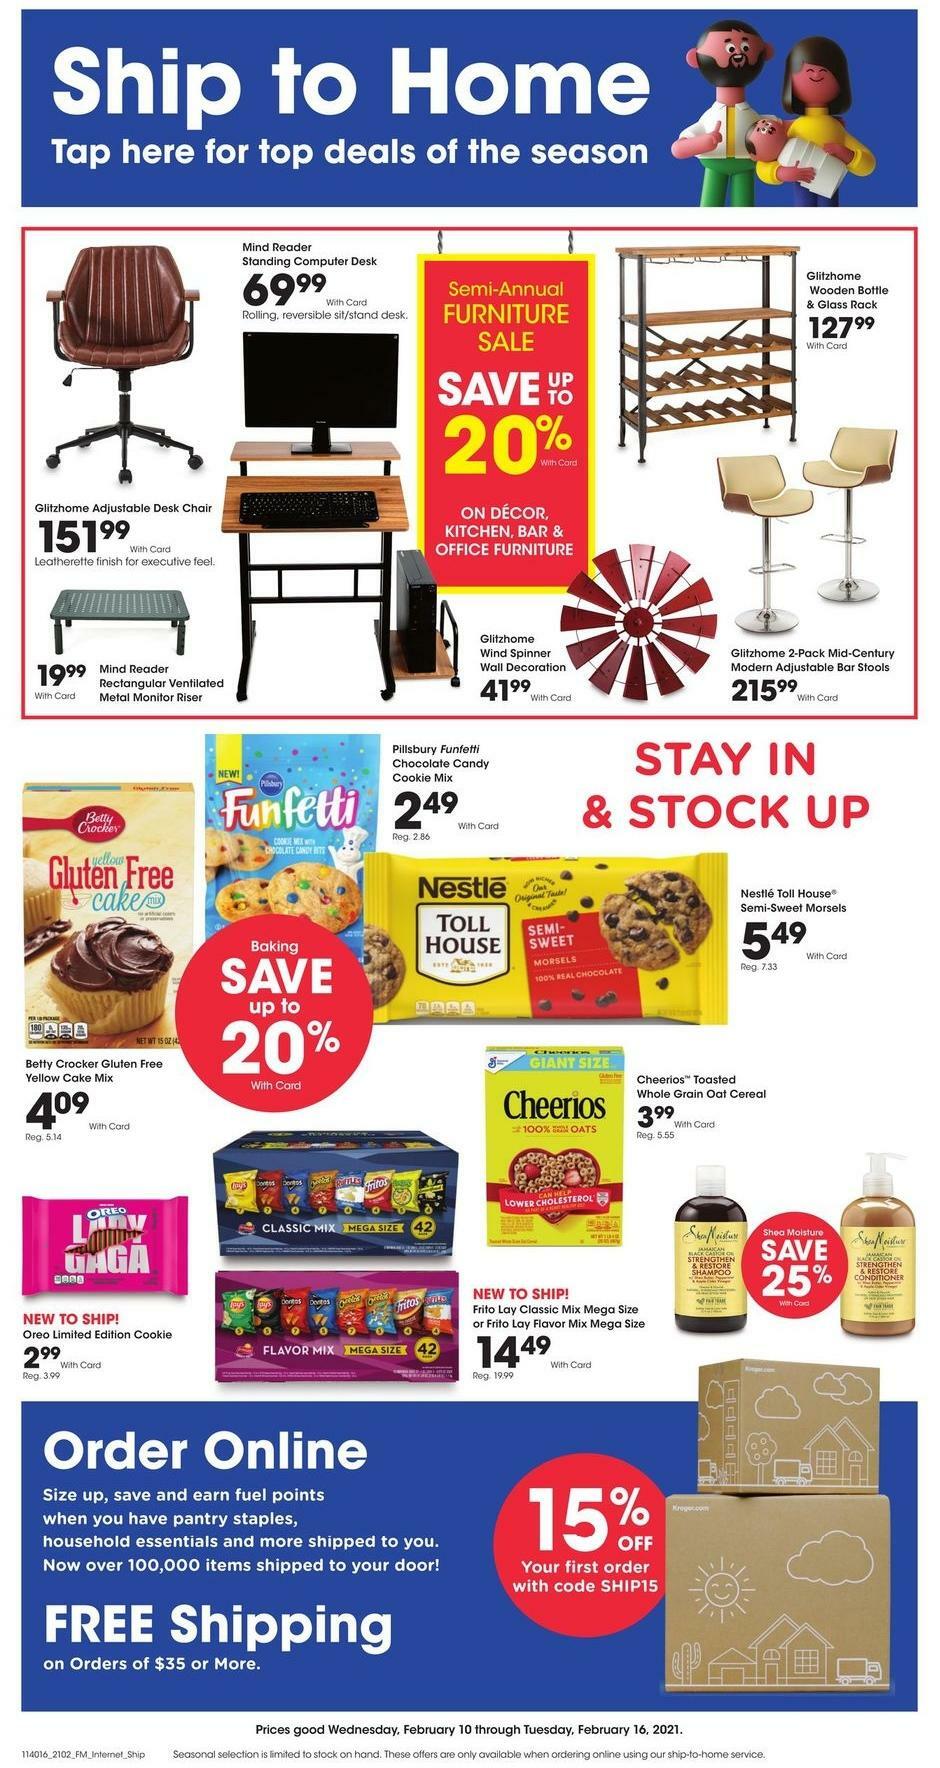 City Market Ship to Home Weekly Ad from February 10